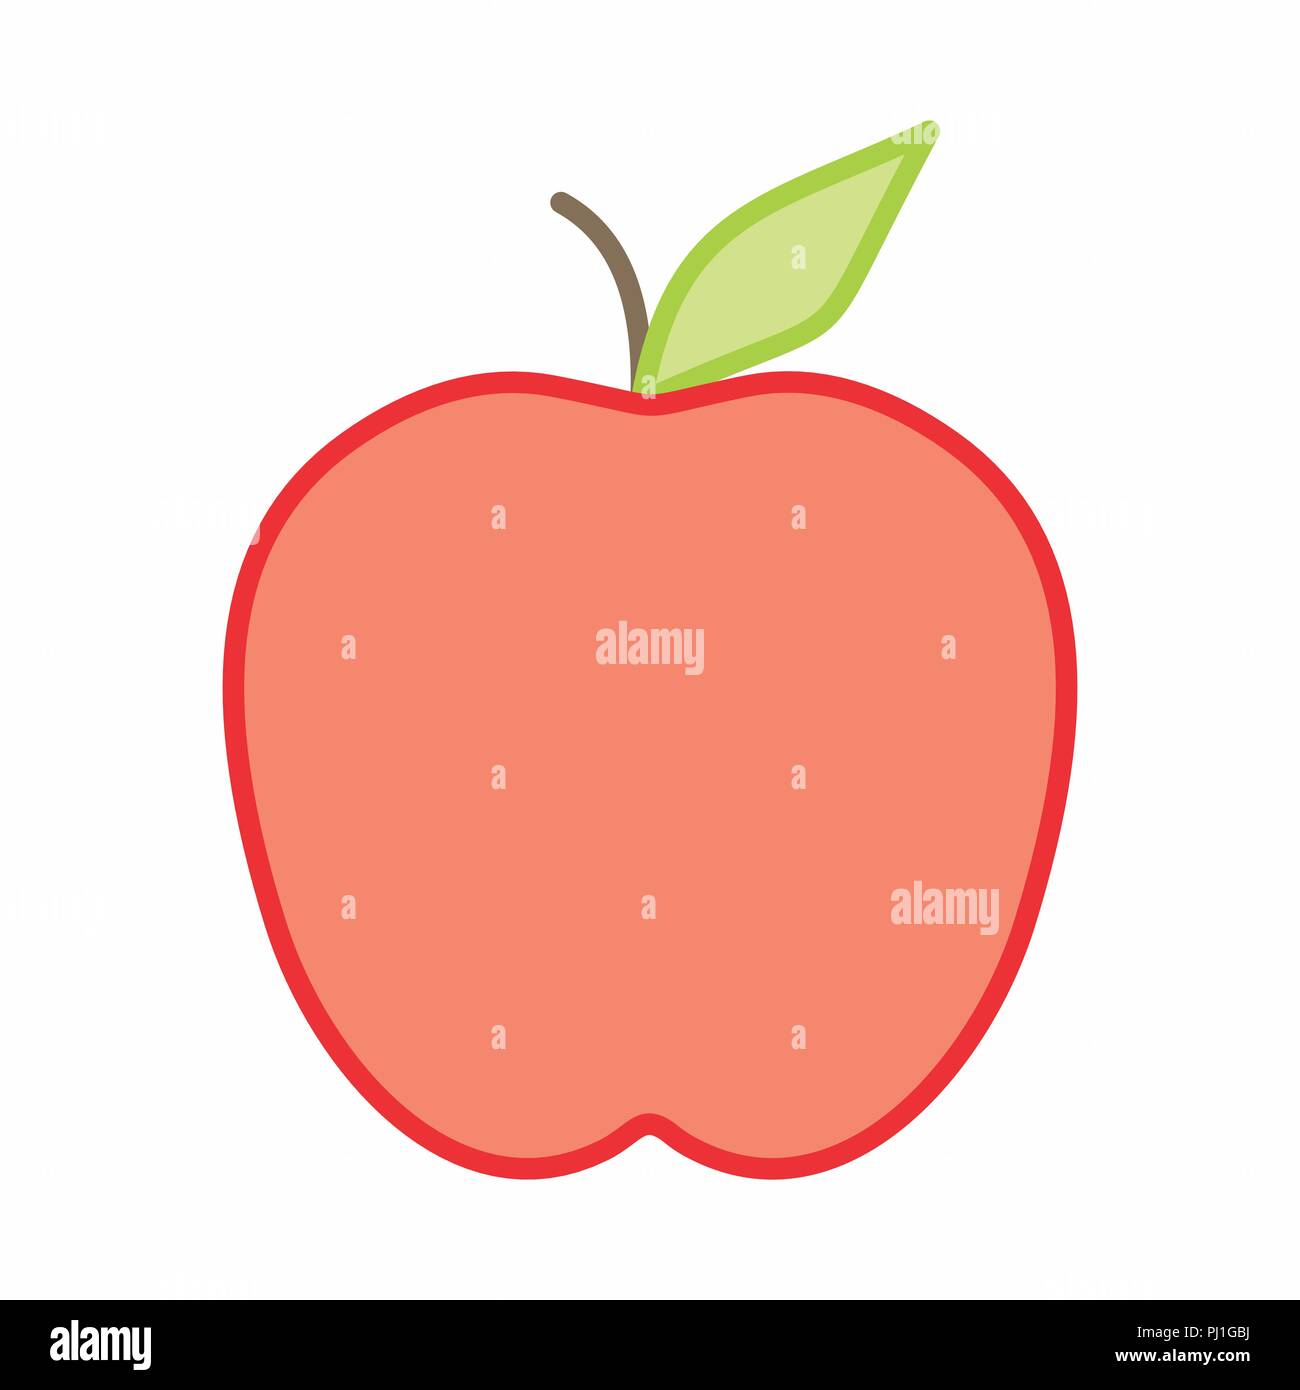 A colorful illustration of an isolated apple on white background Stock Vector